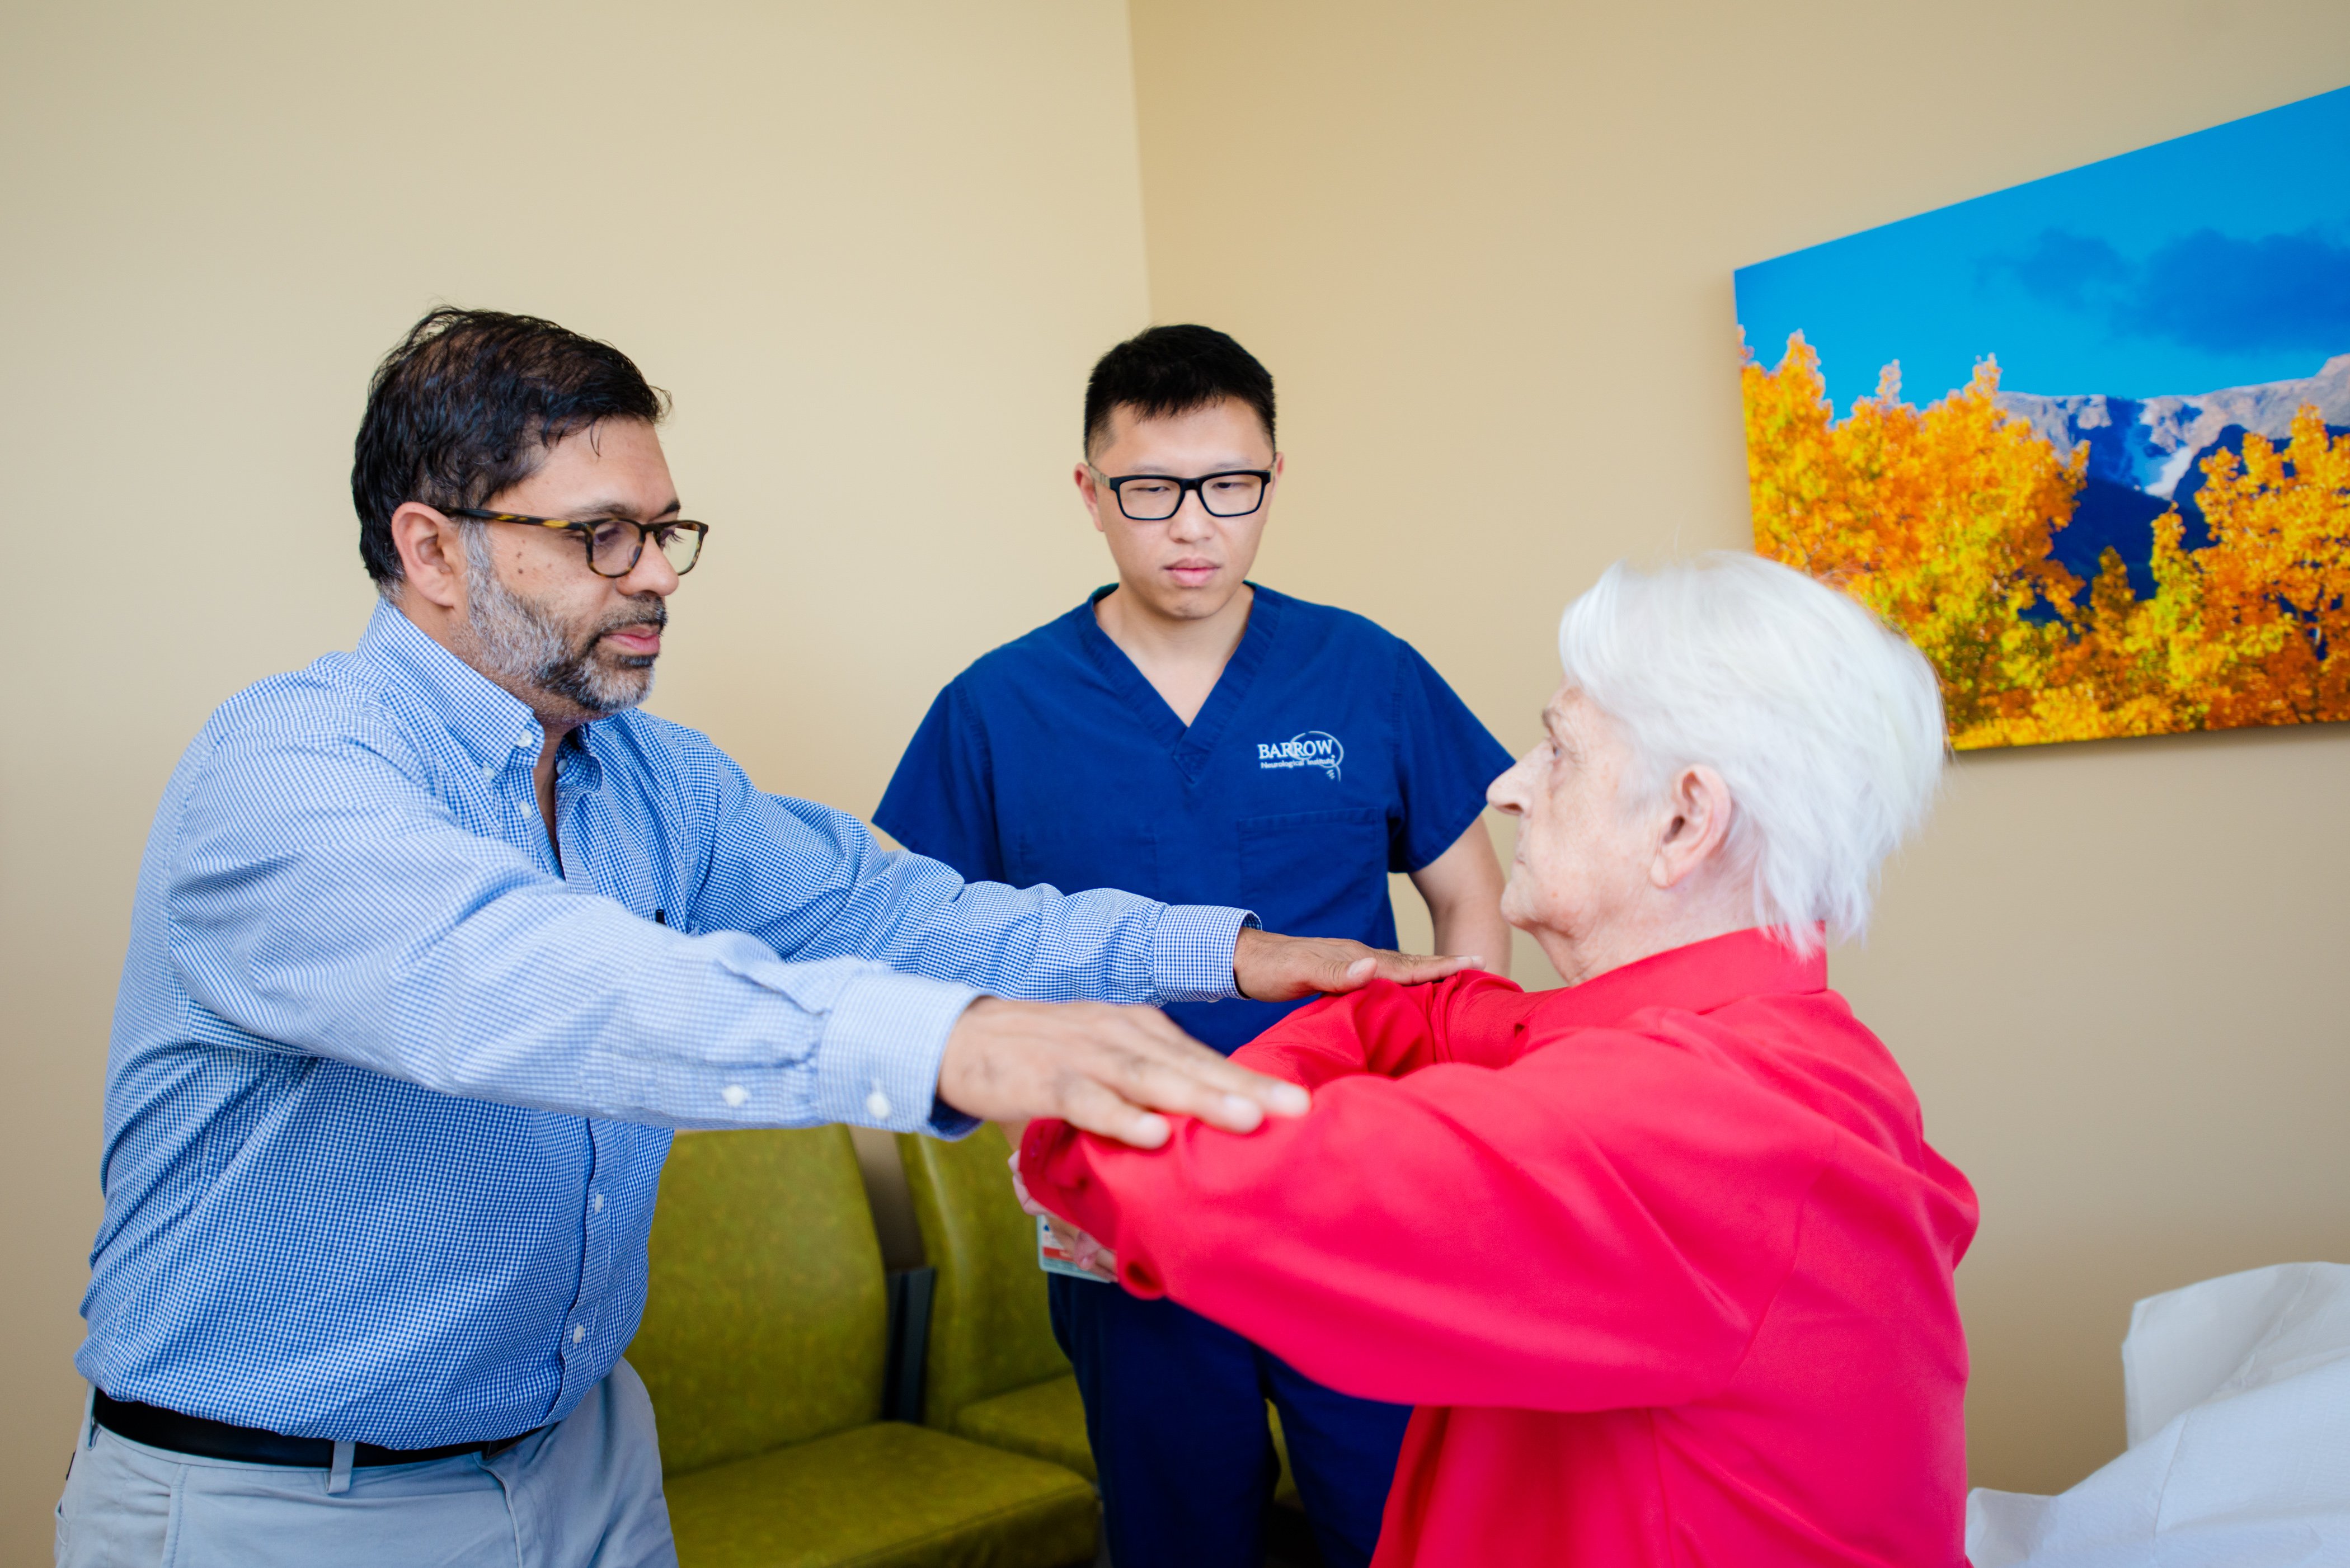 Patients with ALS receive compassionate care from leading Barrow physicians